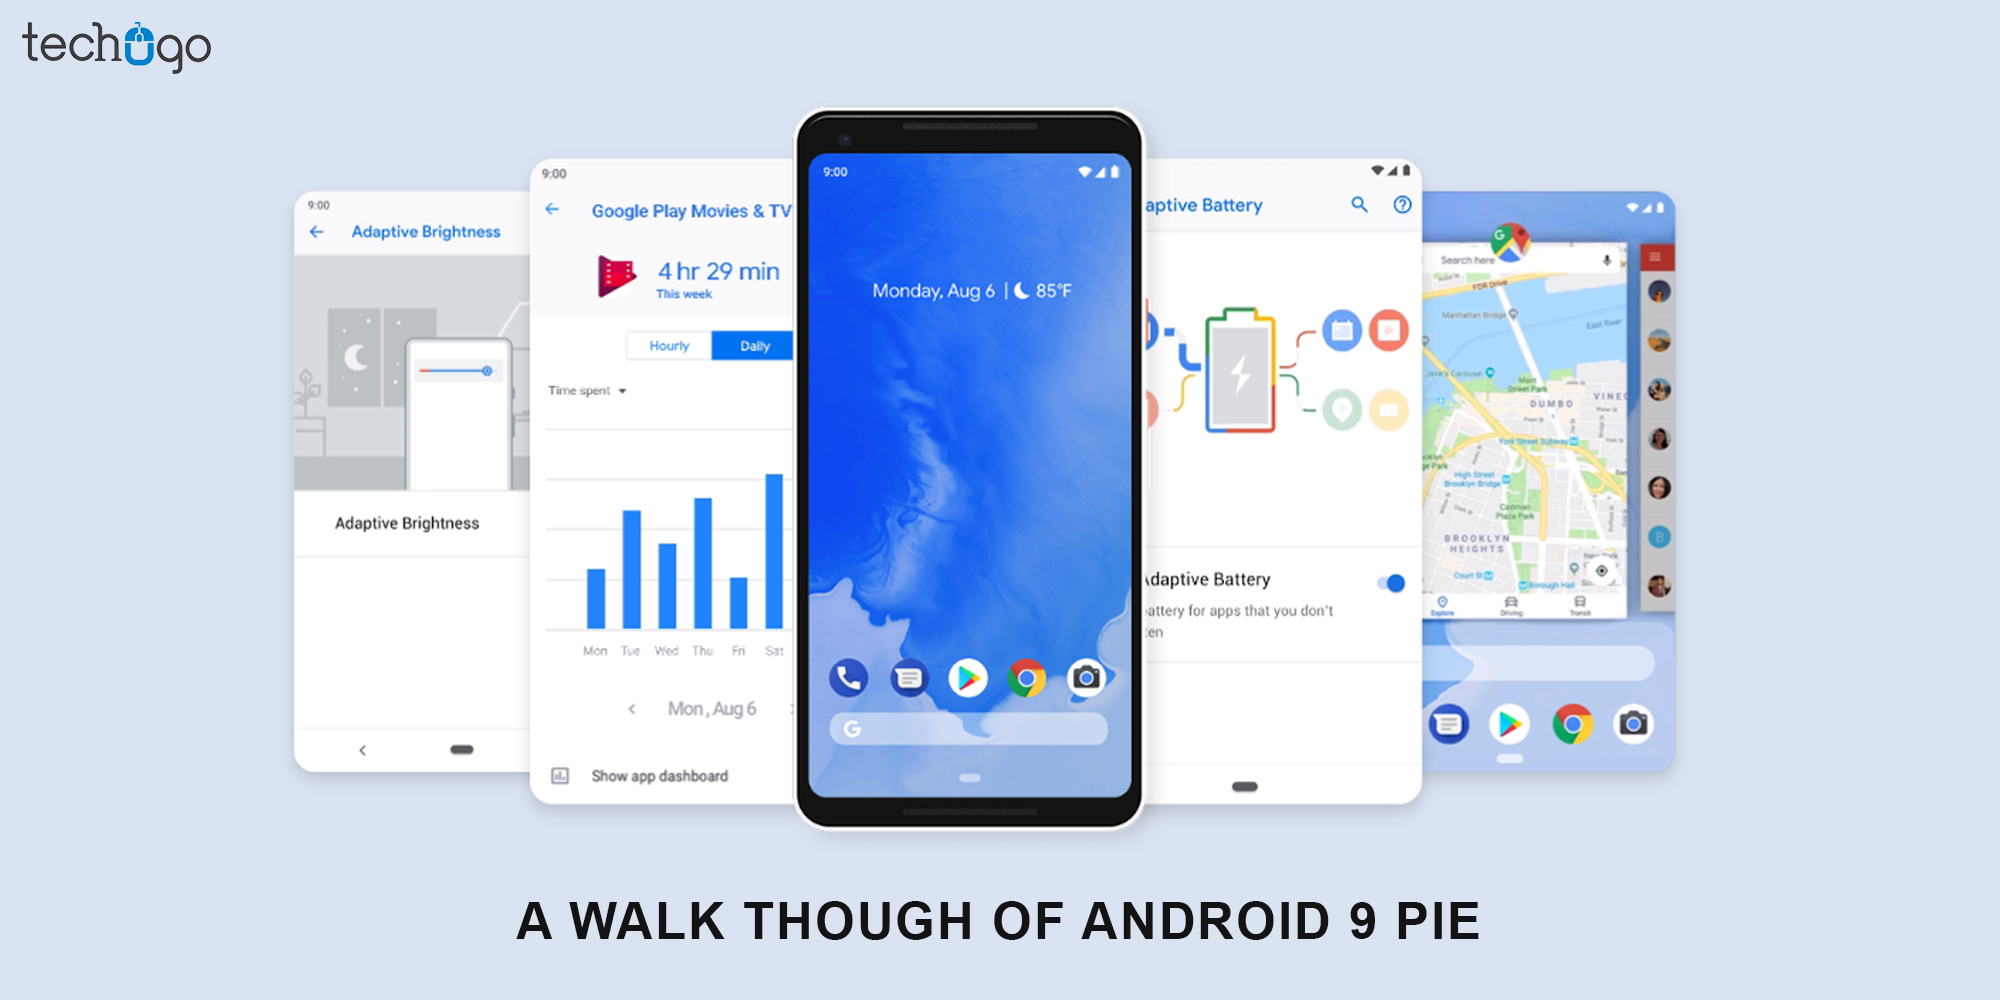 A Walk Though Of Android 9 Pie